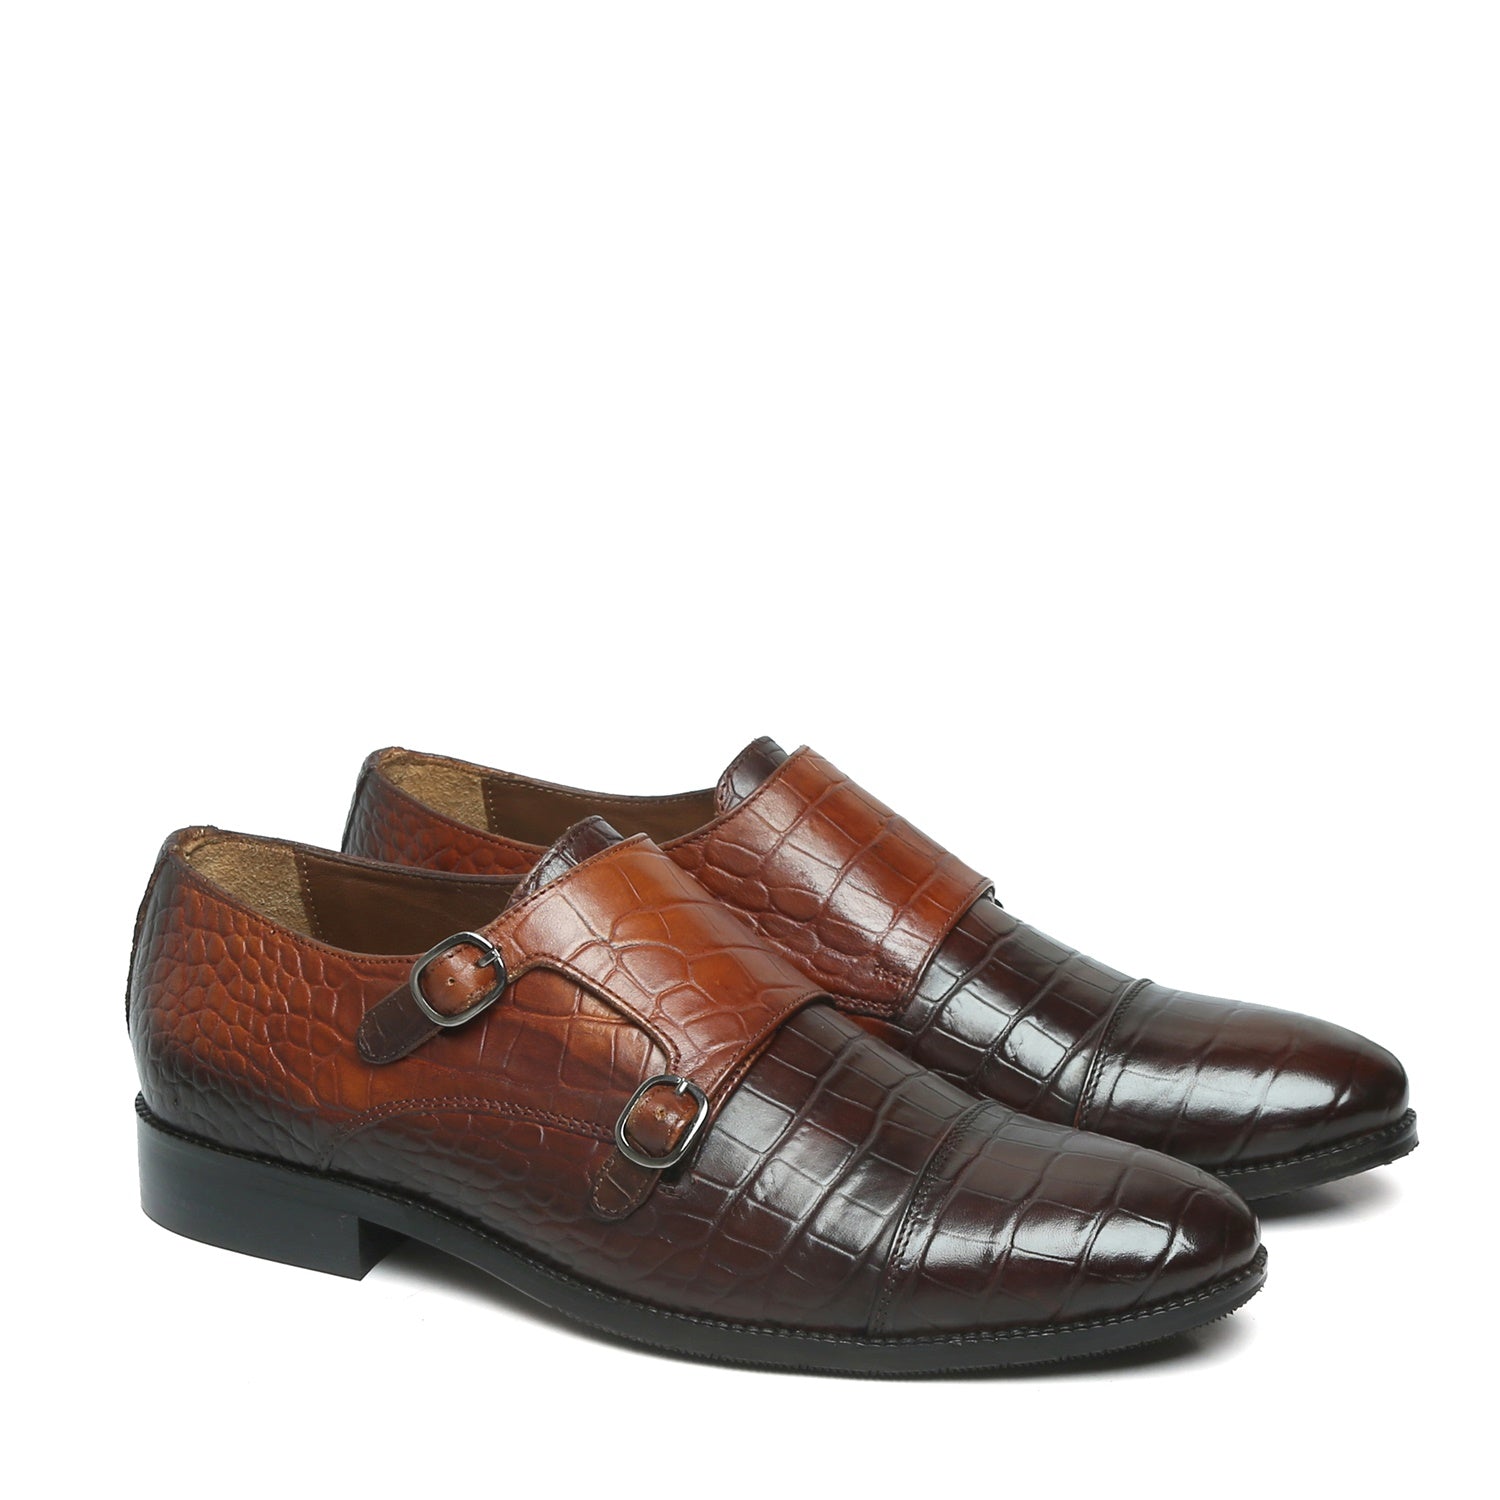 Dual Shade Tan-Brown Croco Leather Double Monk Shoes By Brune & Bareskin